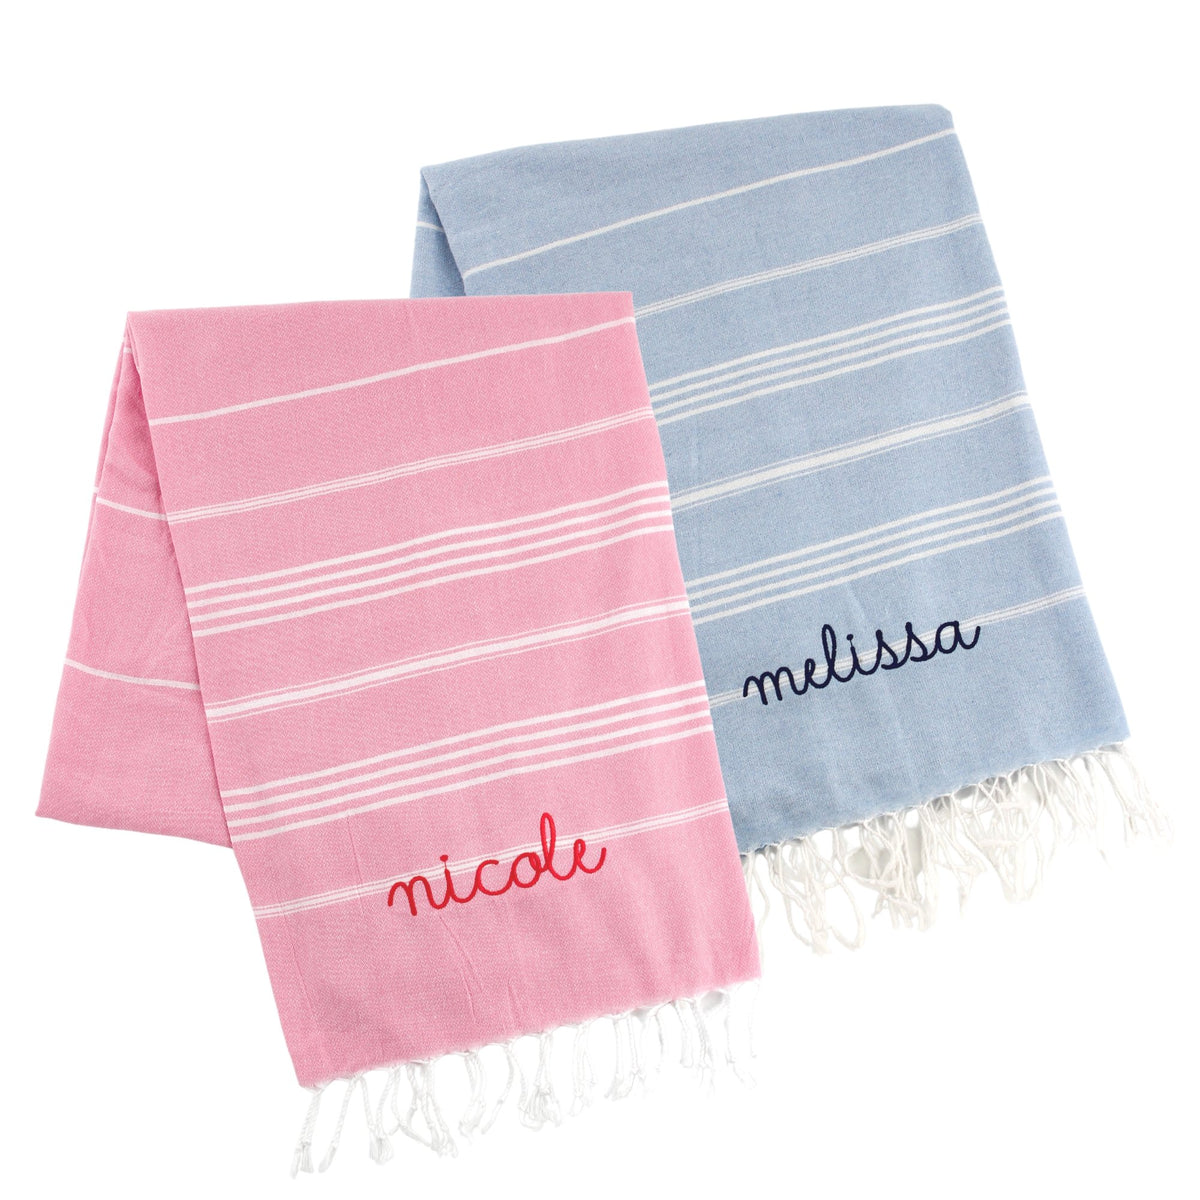 Turkish Towels Made in Portugal - B Moore Design, Inc.